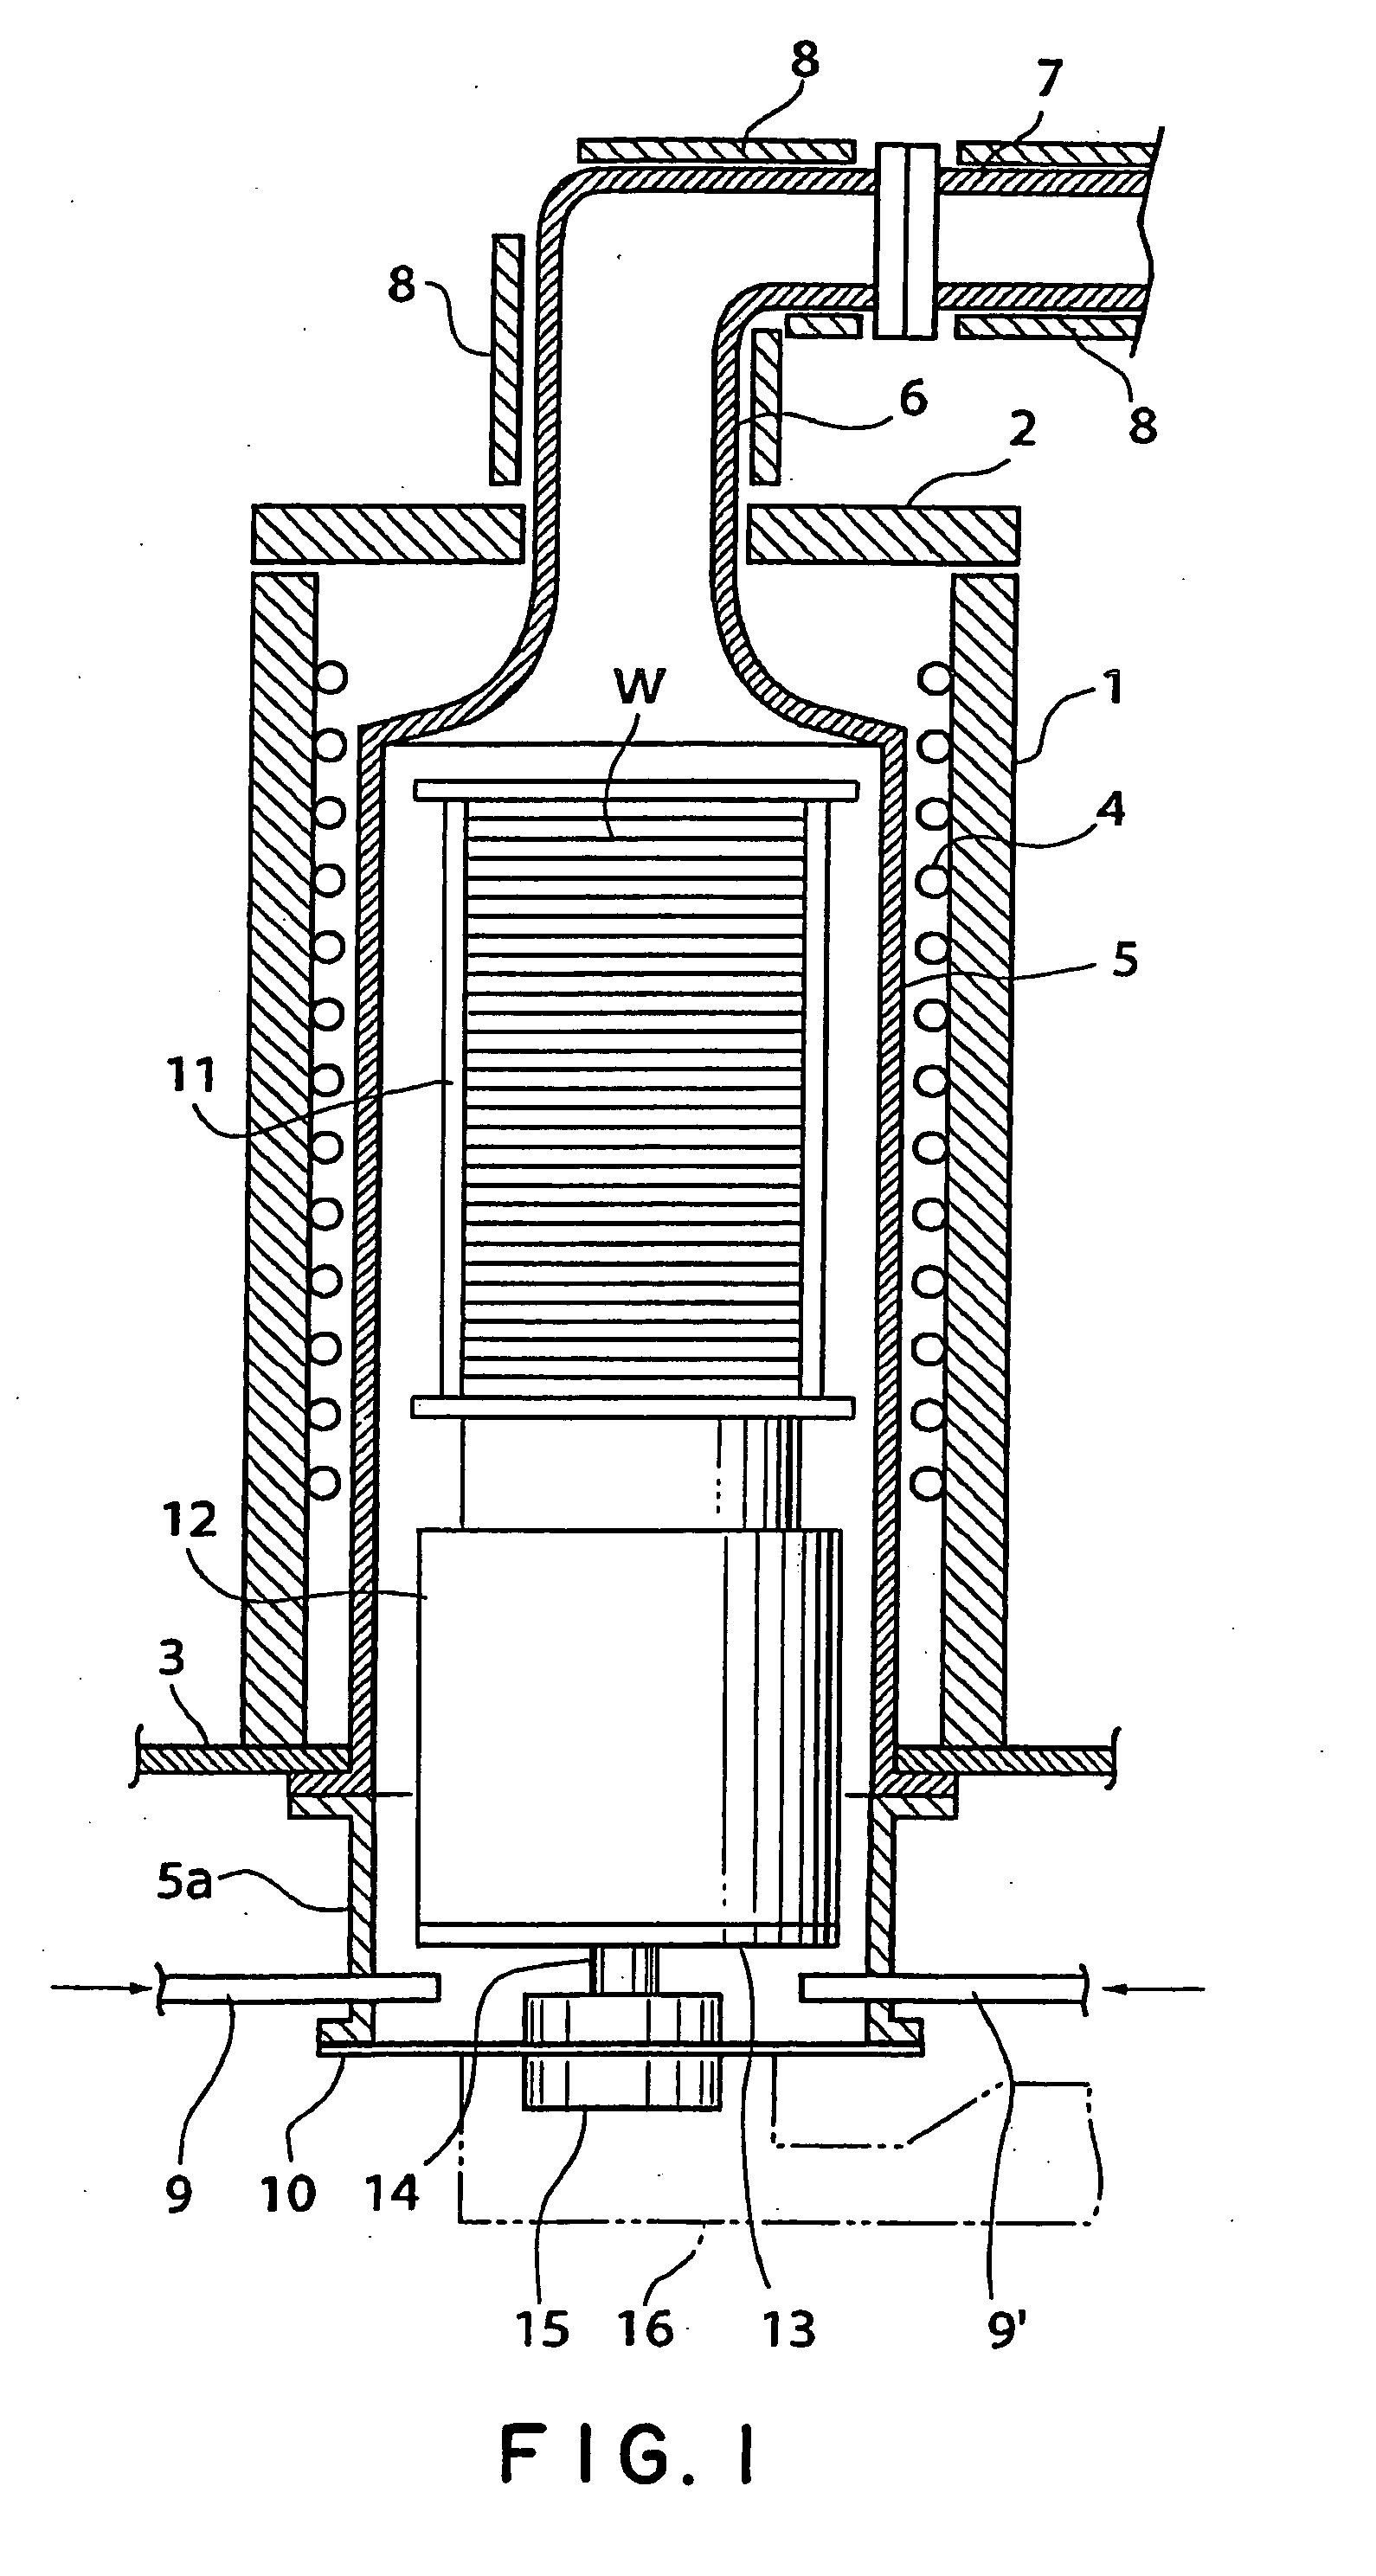 Thermal processing unit